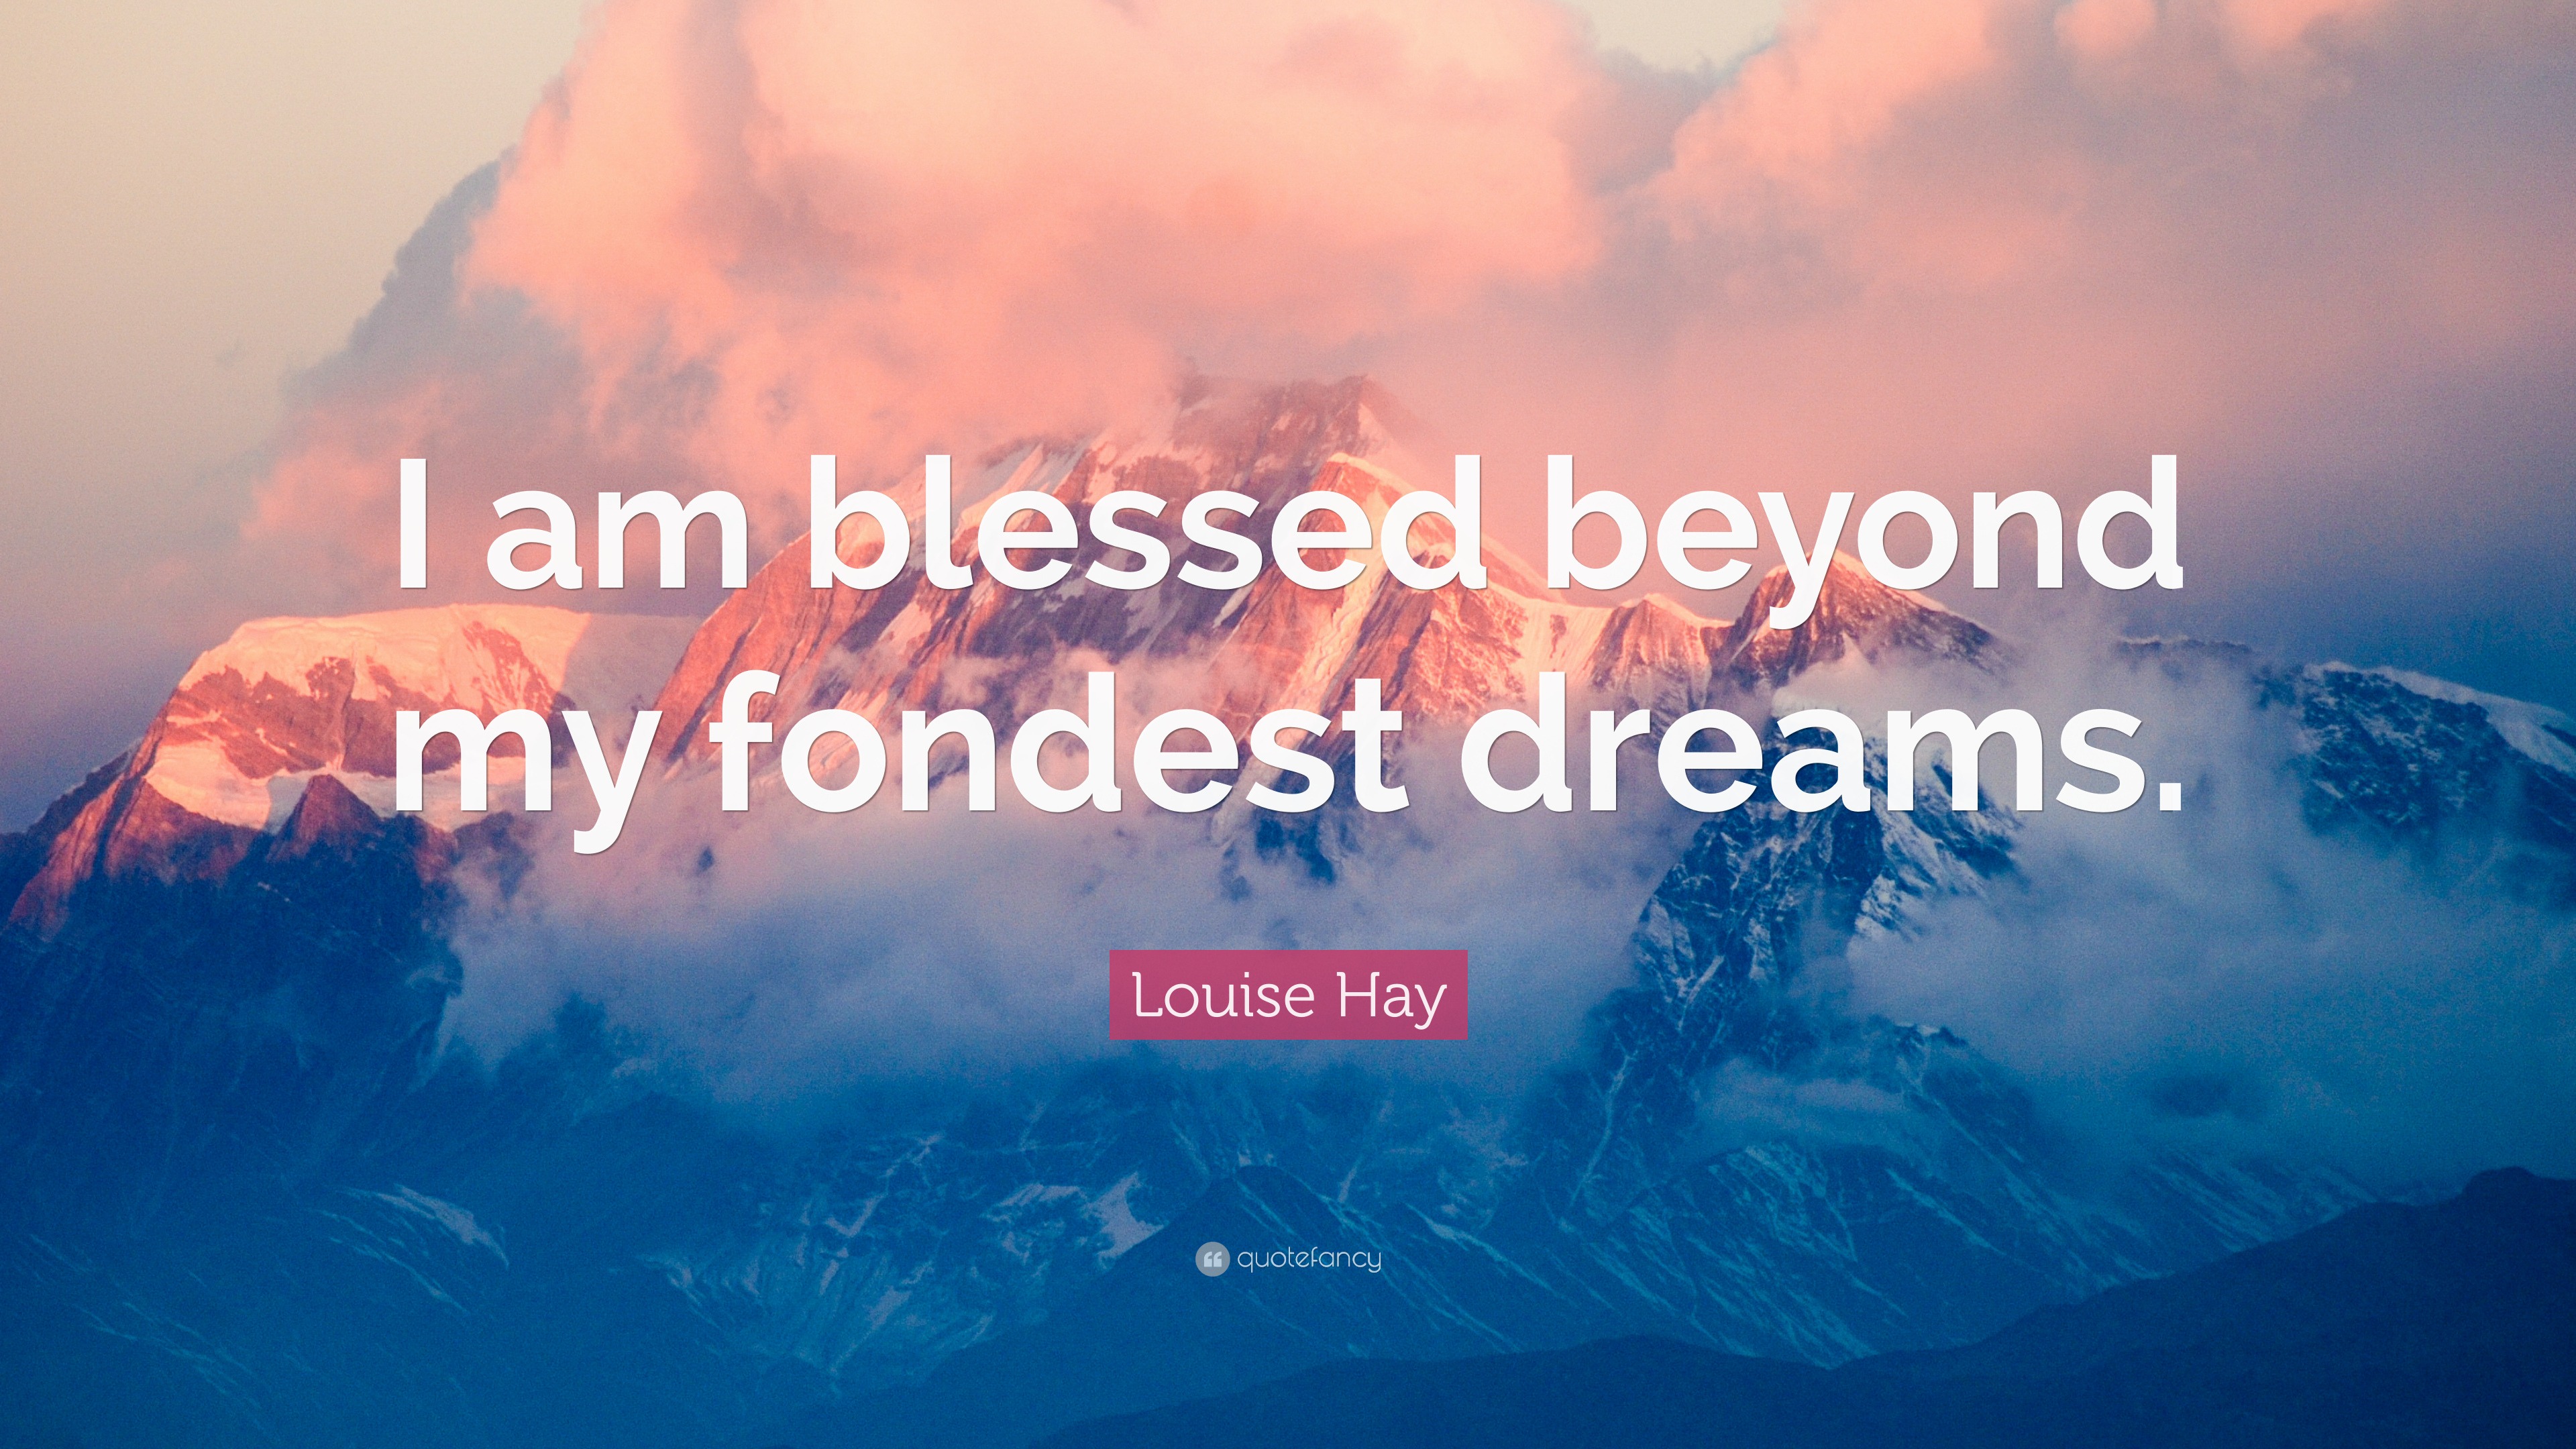 Louise Hay Quote: “I am blessed beyond my fondest dreams.”